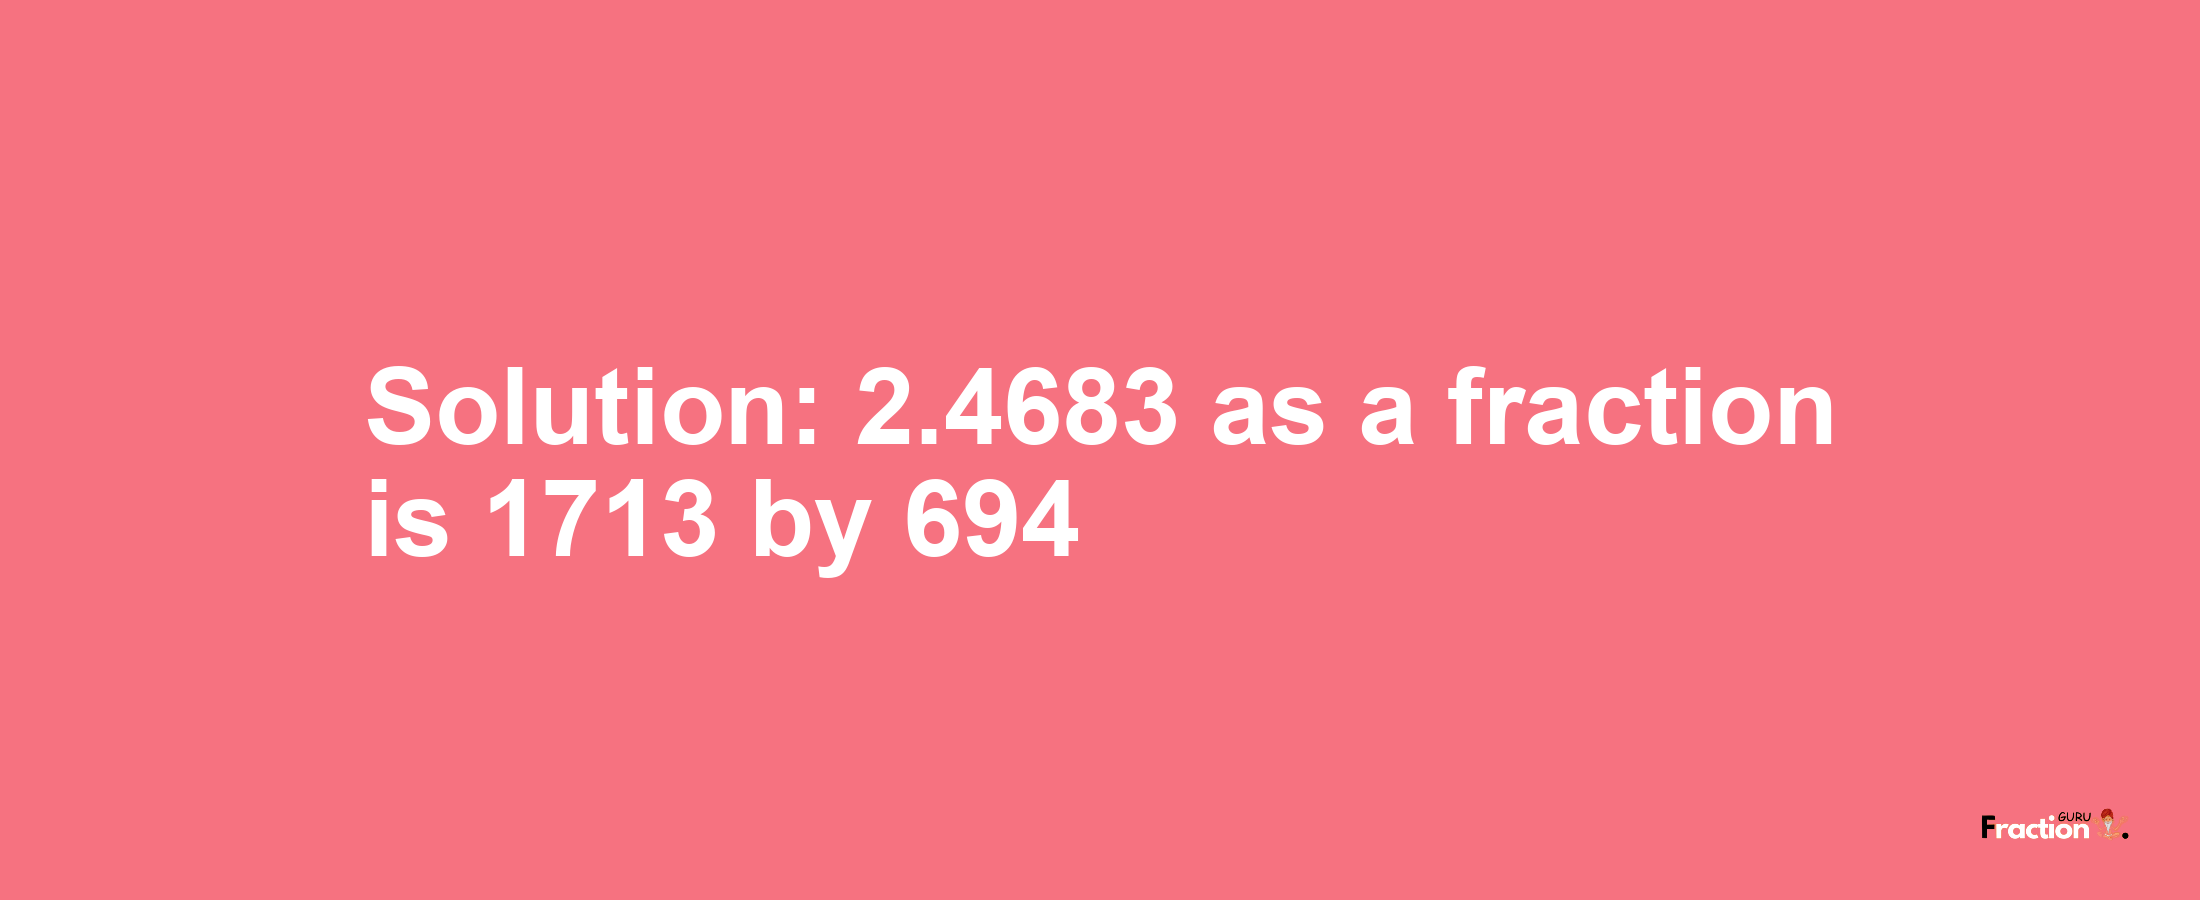 Solution:2.4683 as a fraction is 1713/694